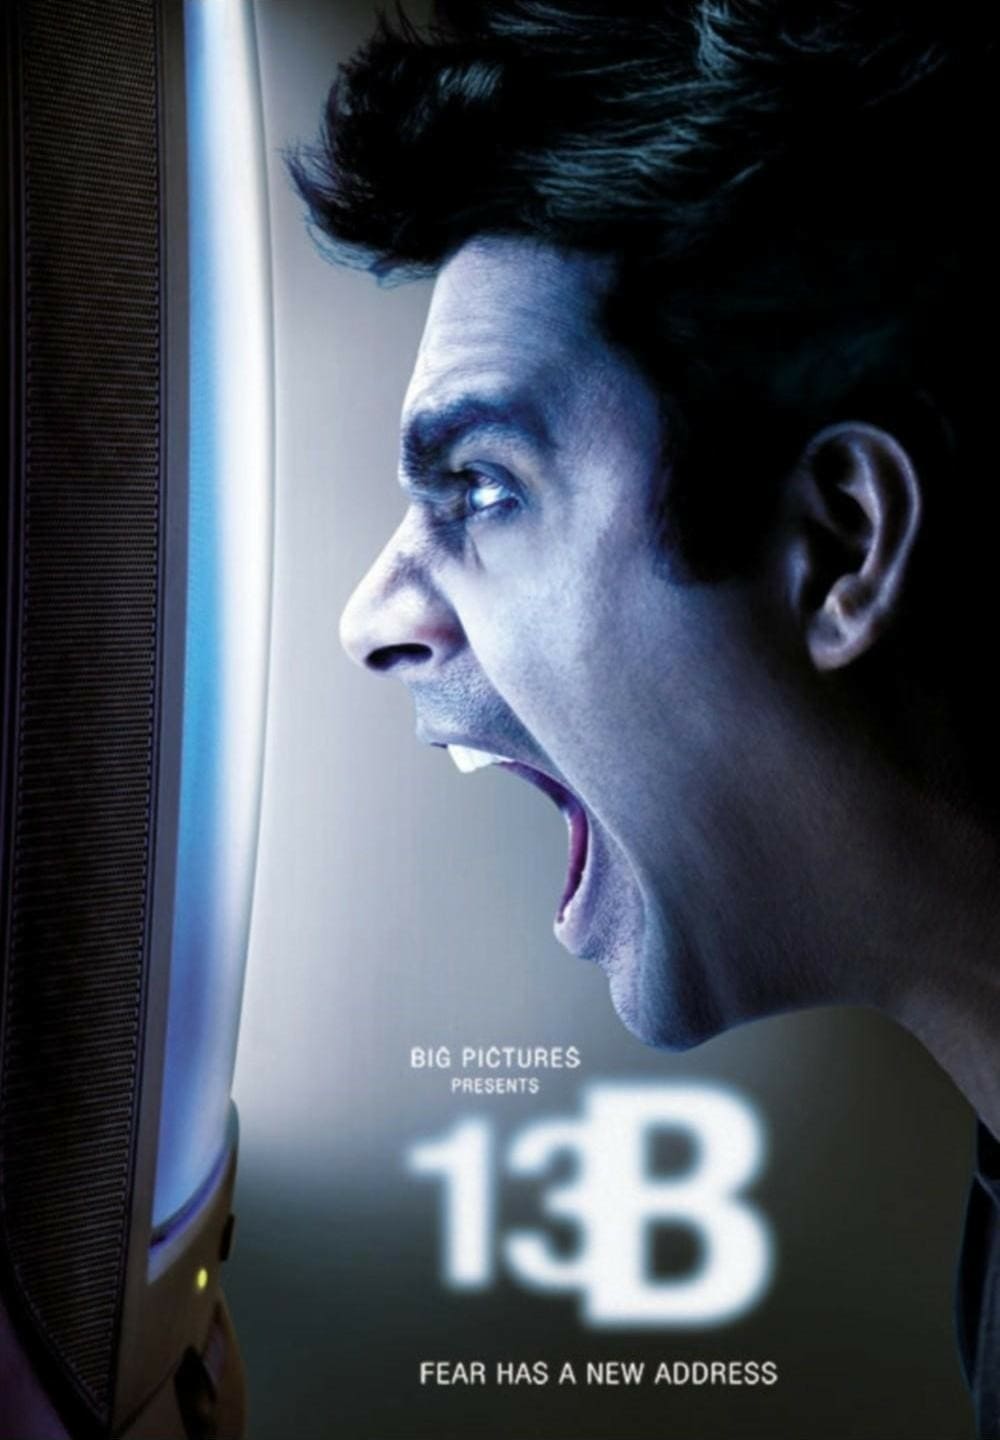 Poster for the movie "13B"